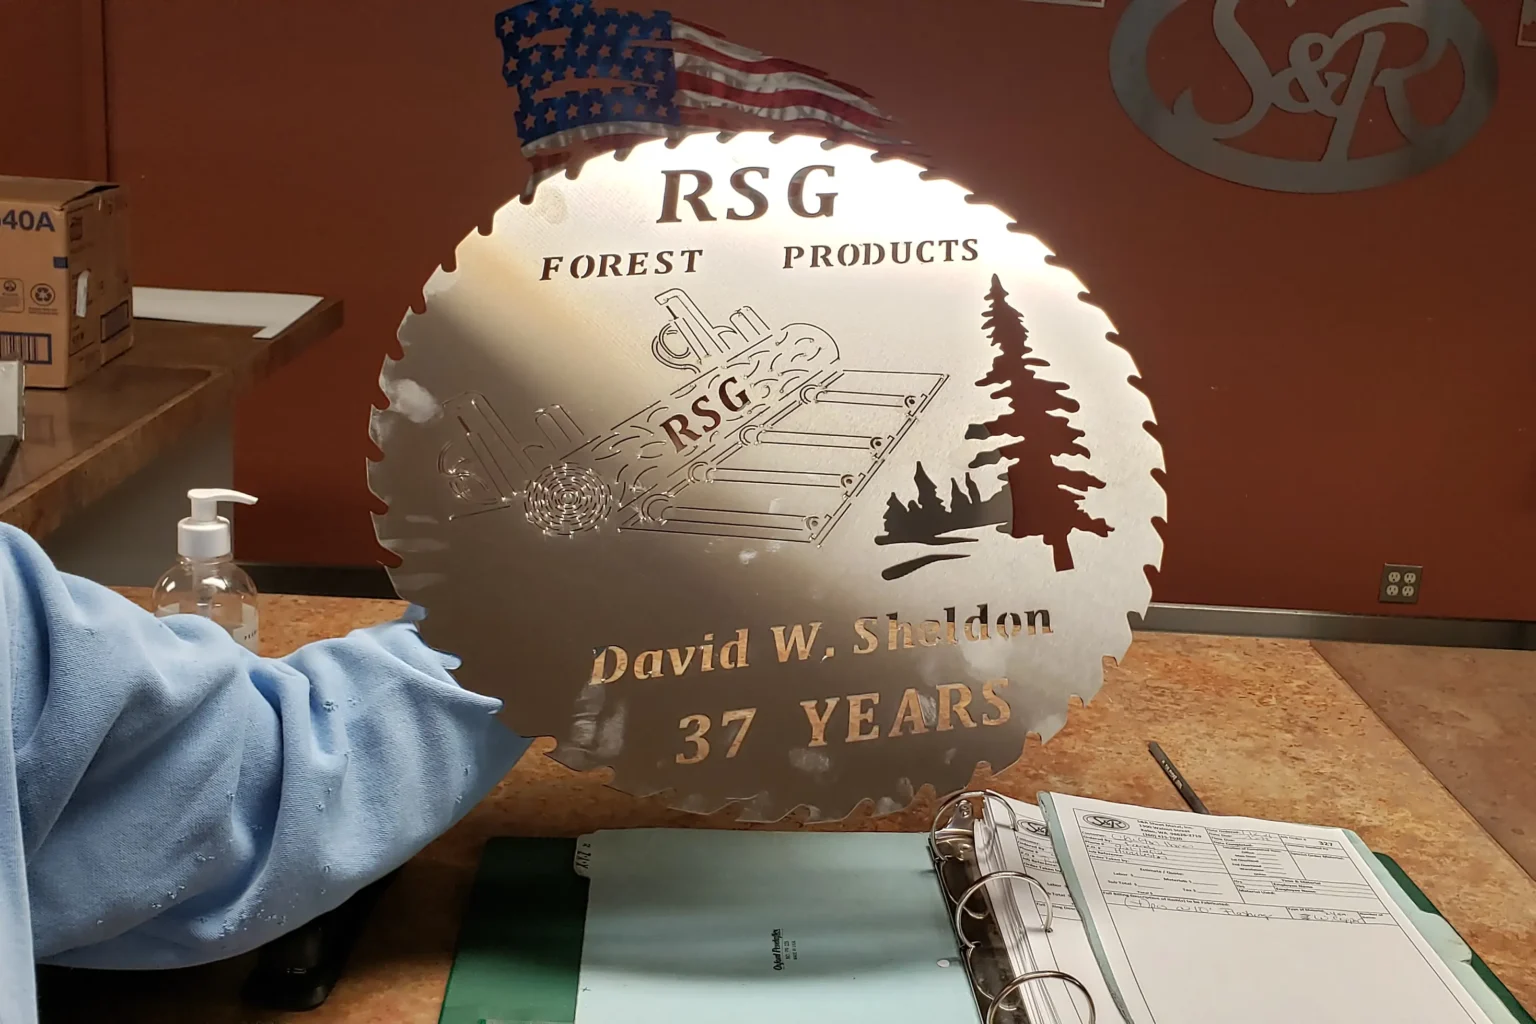 Laser cutting work done by S&R Sheet Metal in Kelso WA